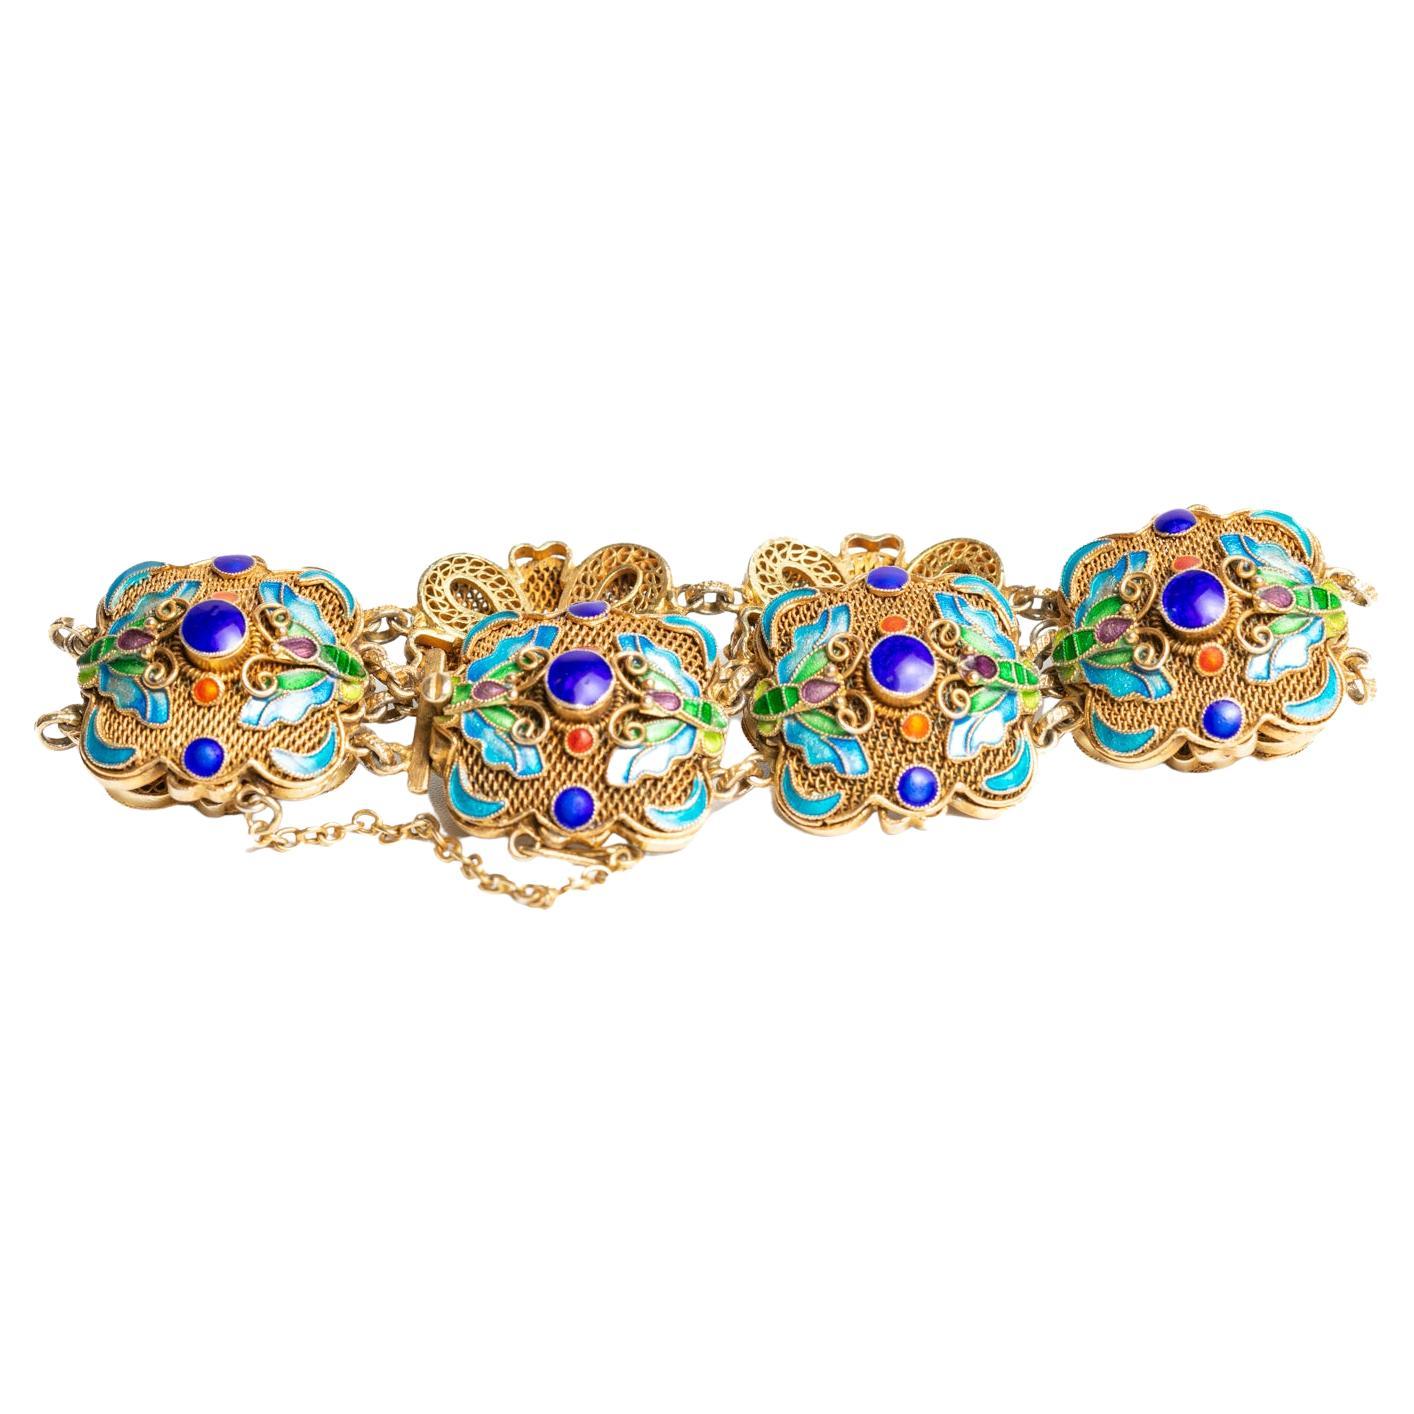 Wonderful Antique Chinese Export Silver Gilt & Enamel Bracelet decorated with a pair of turquoise and green butterflies on each panel separated with cobalt and orange enamel dots. The piece is richly colorful and vibrant. Stamped 'SILVER' on the